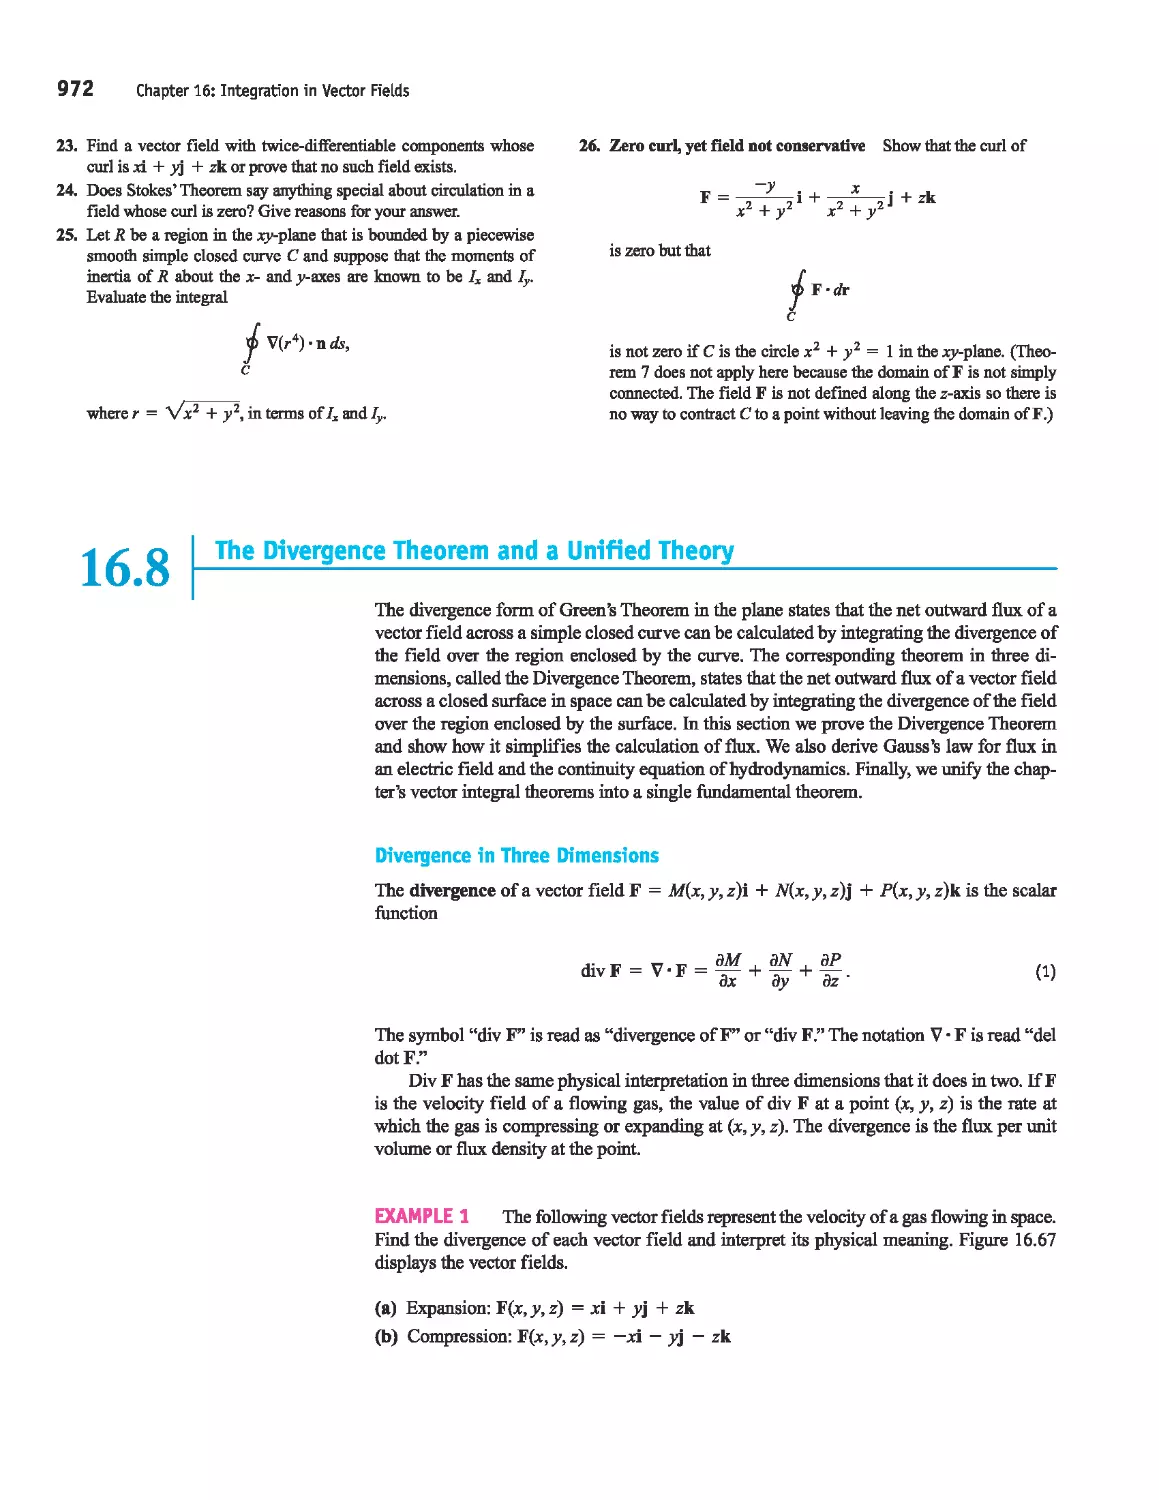 16.8 - The Divergence Theorem and a Unified Theory